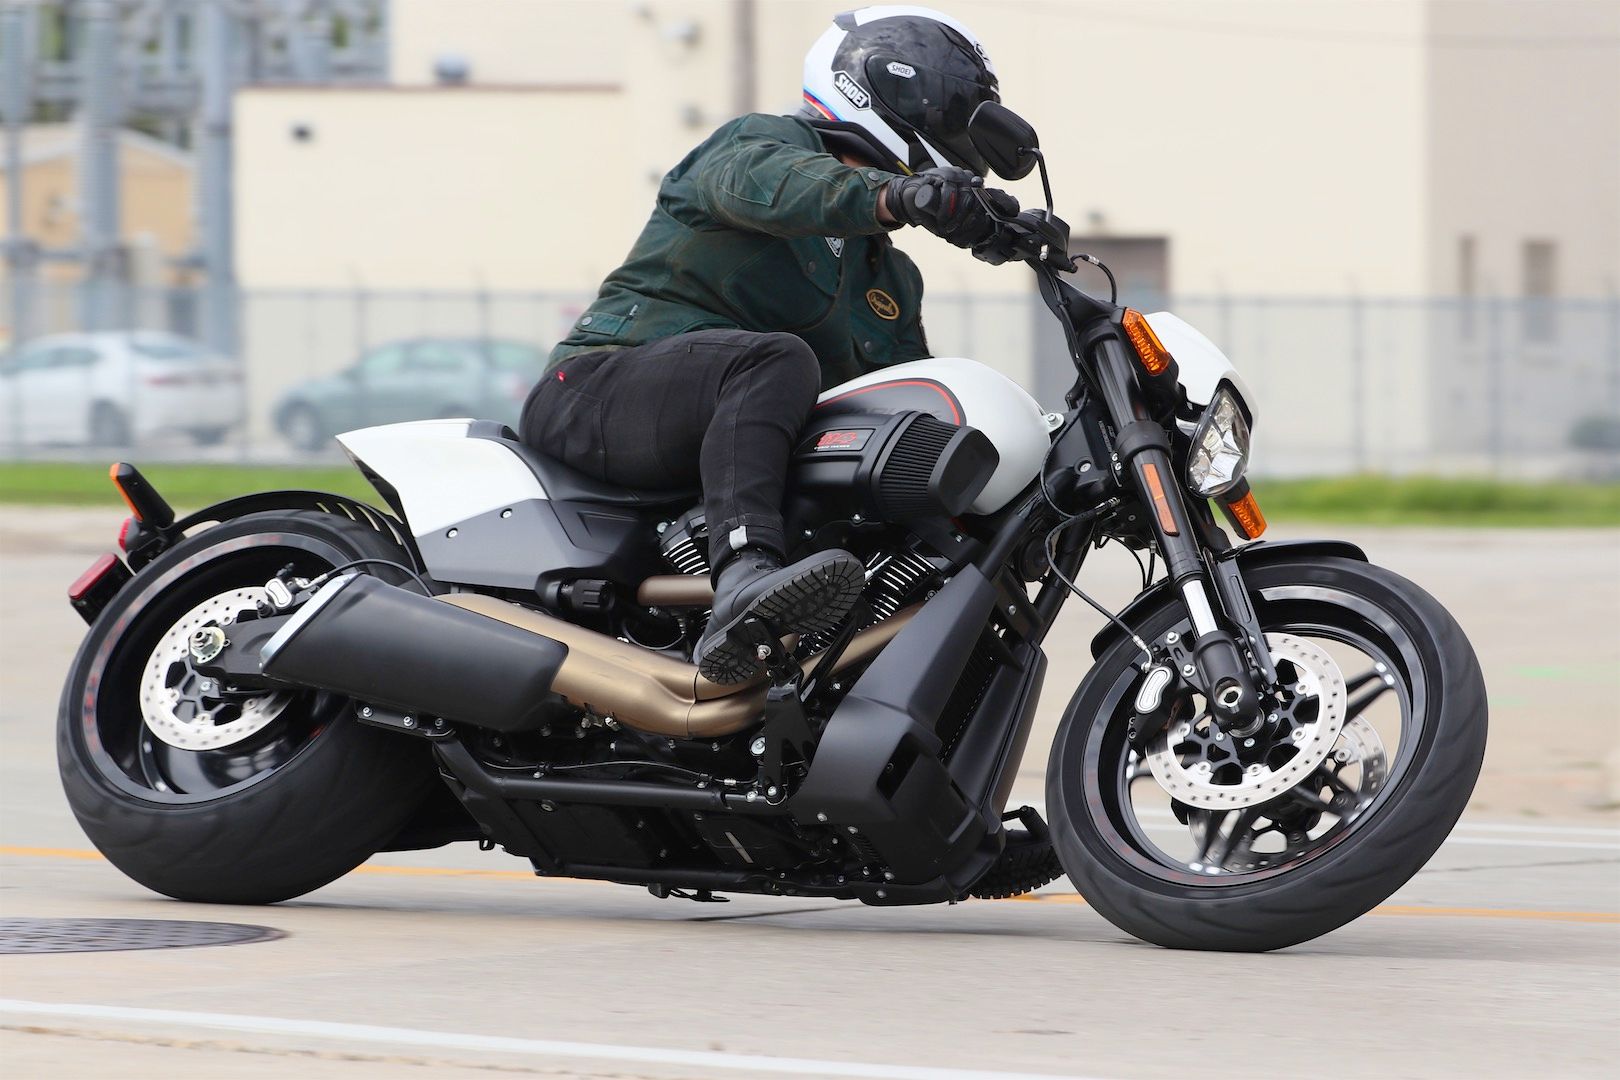 riding the Harley-Davidson FXDR 114.